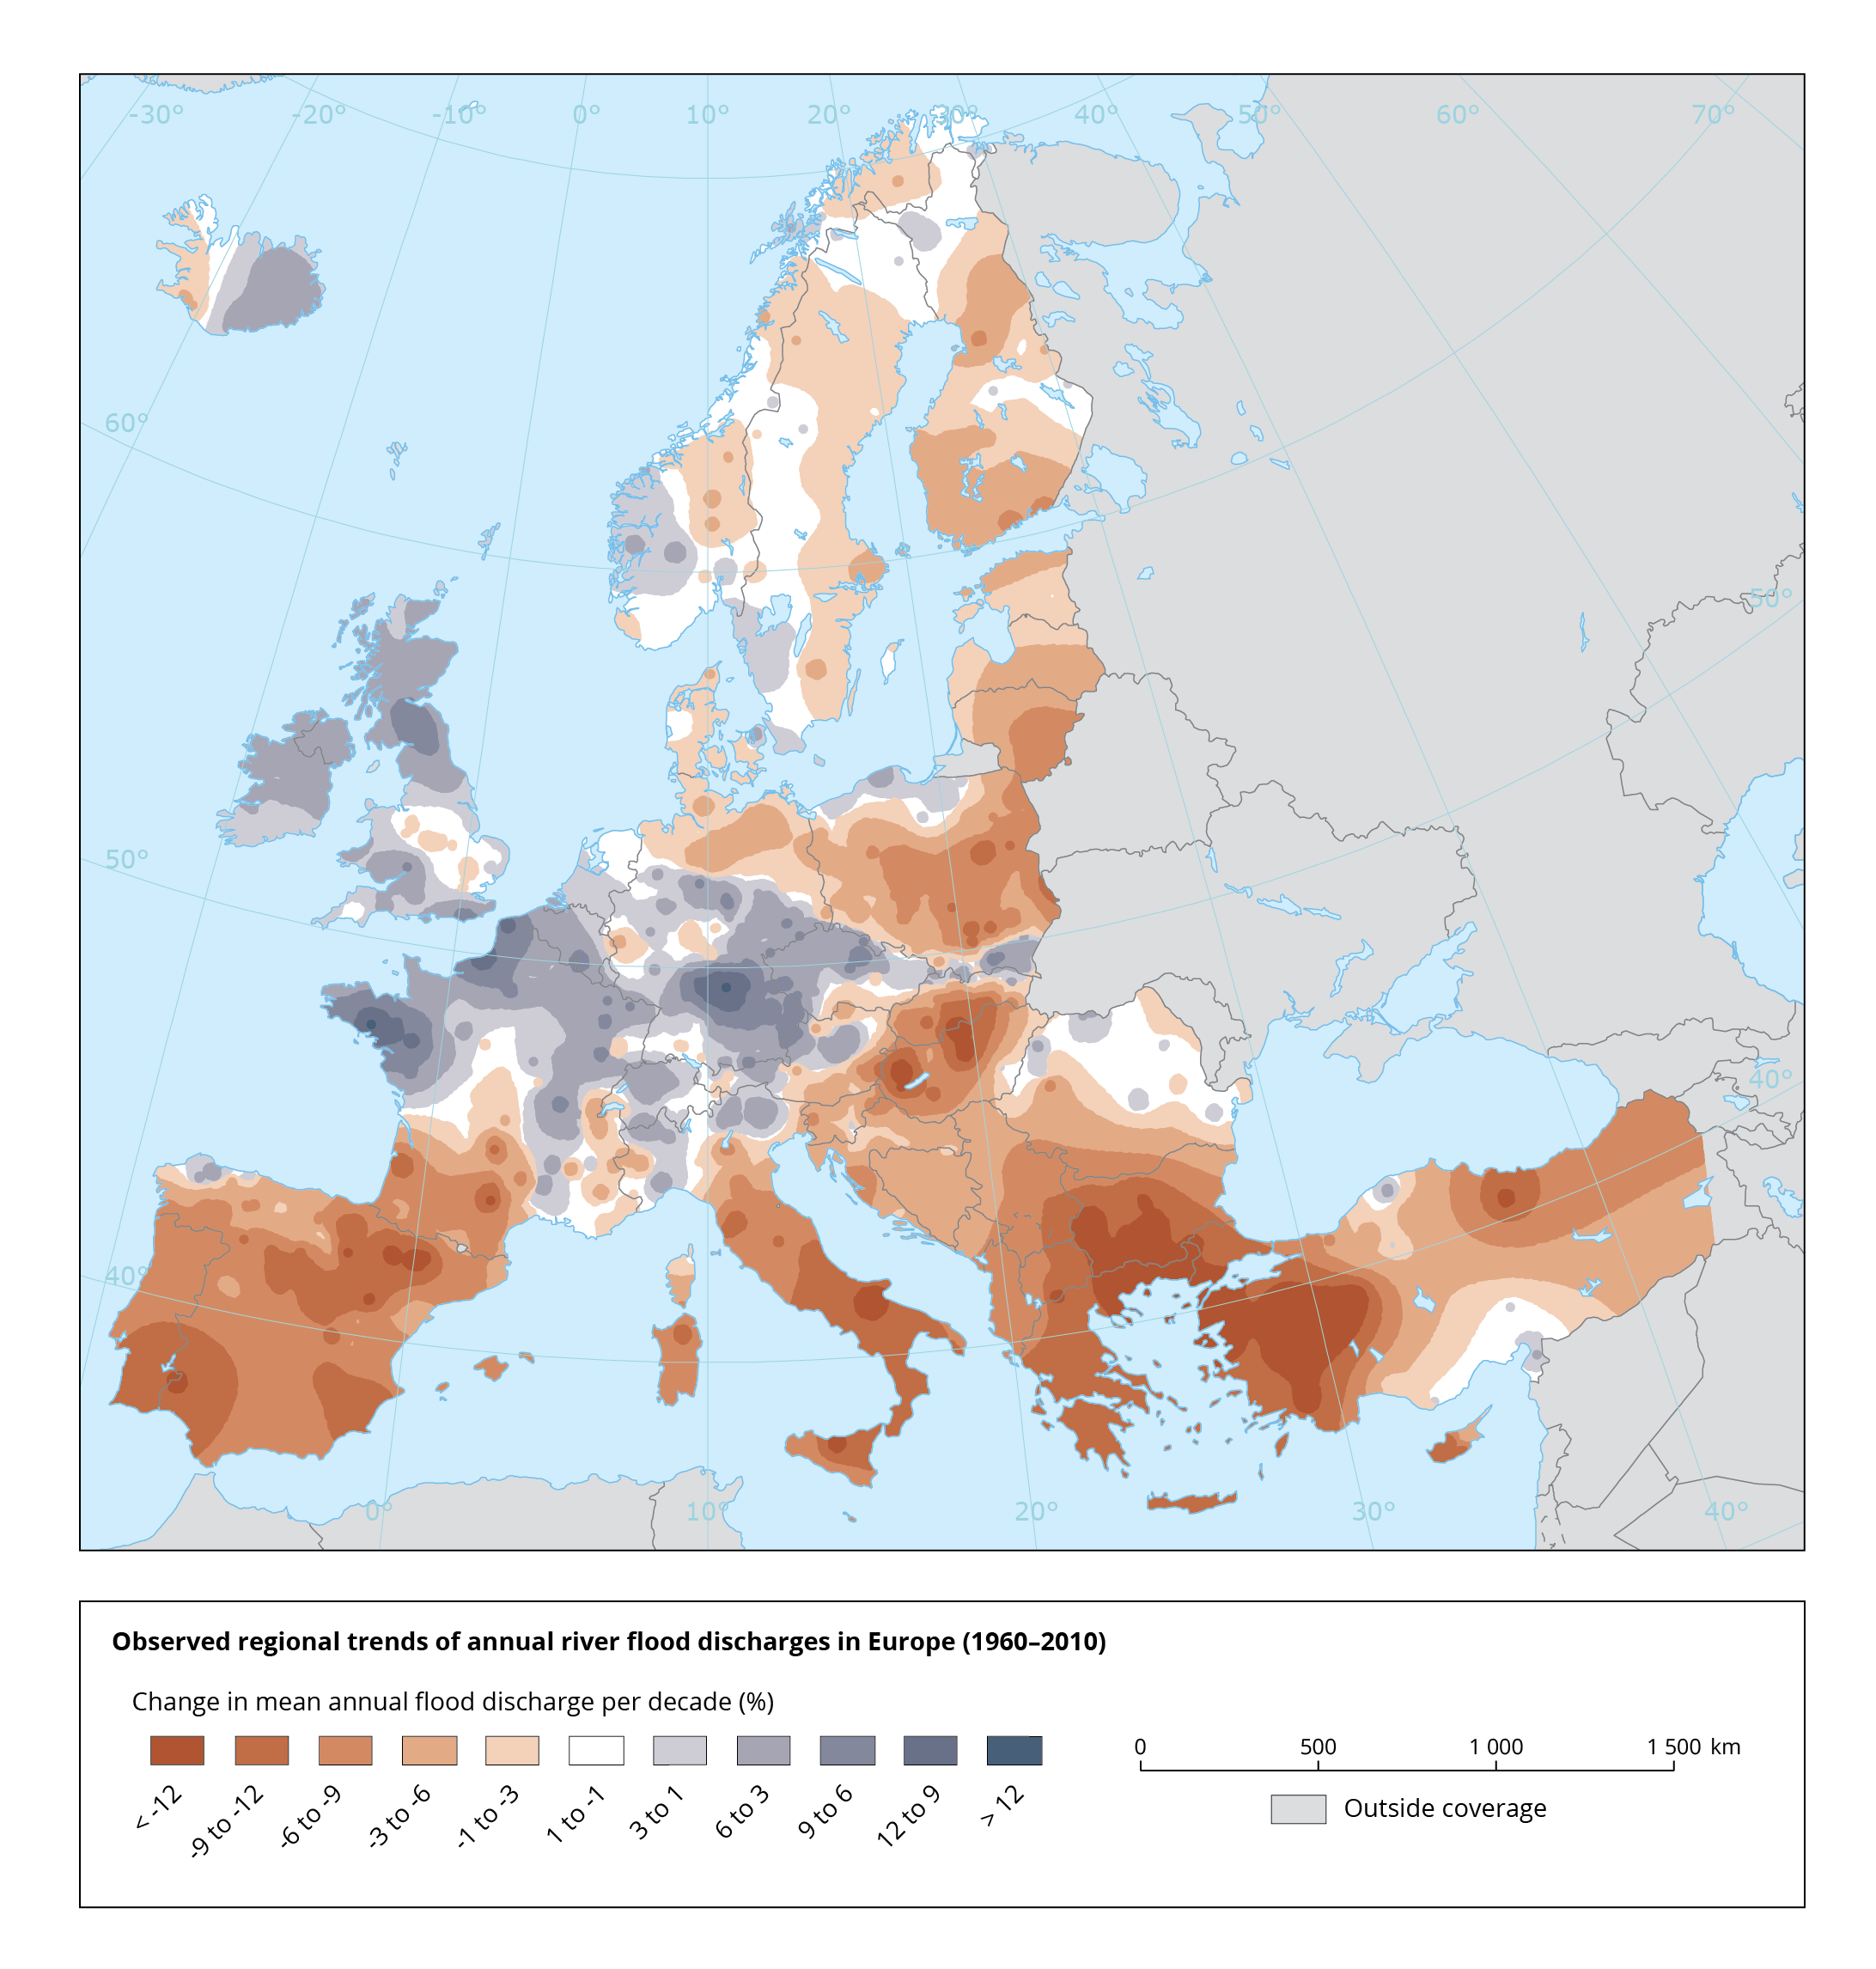 Observed regional trends in annual river flood discharges in Europe (1960–2010)